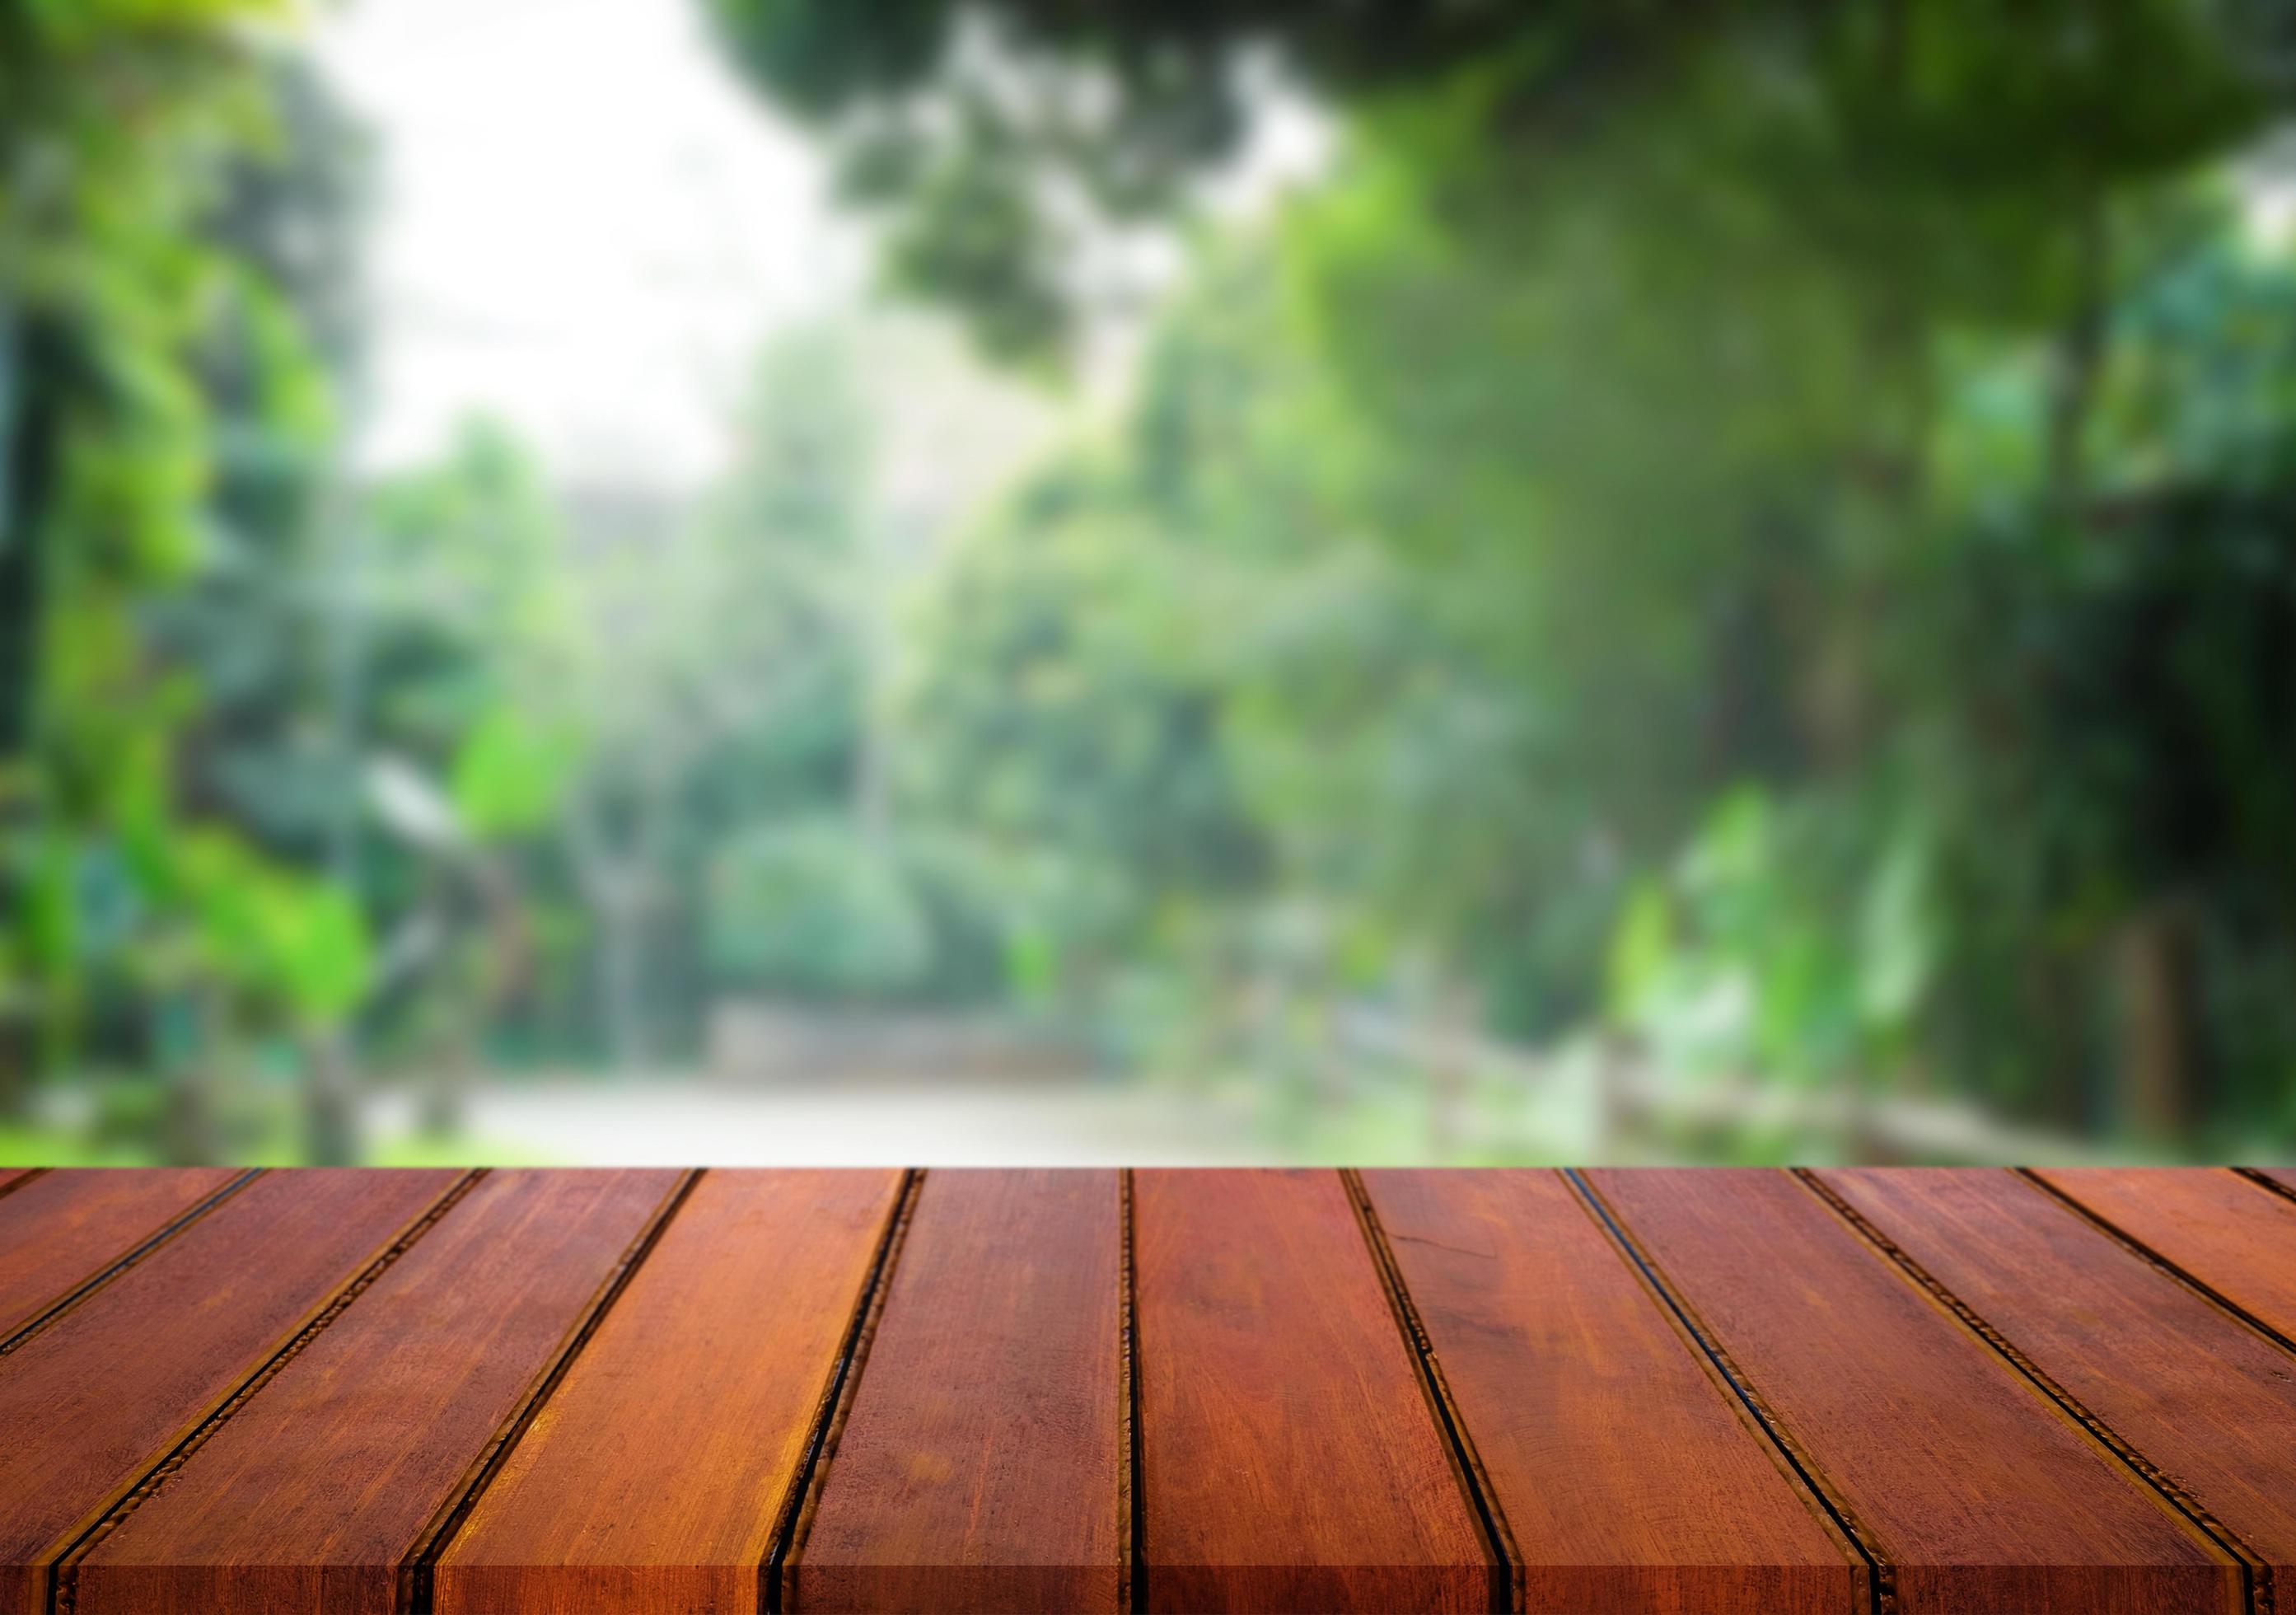 Selected focus empty brown wooden table and green garden or forest blur  background with bokeh image. for your photomontage or product display.  10330451 Stock Photo at Vecteezy